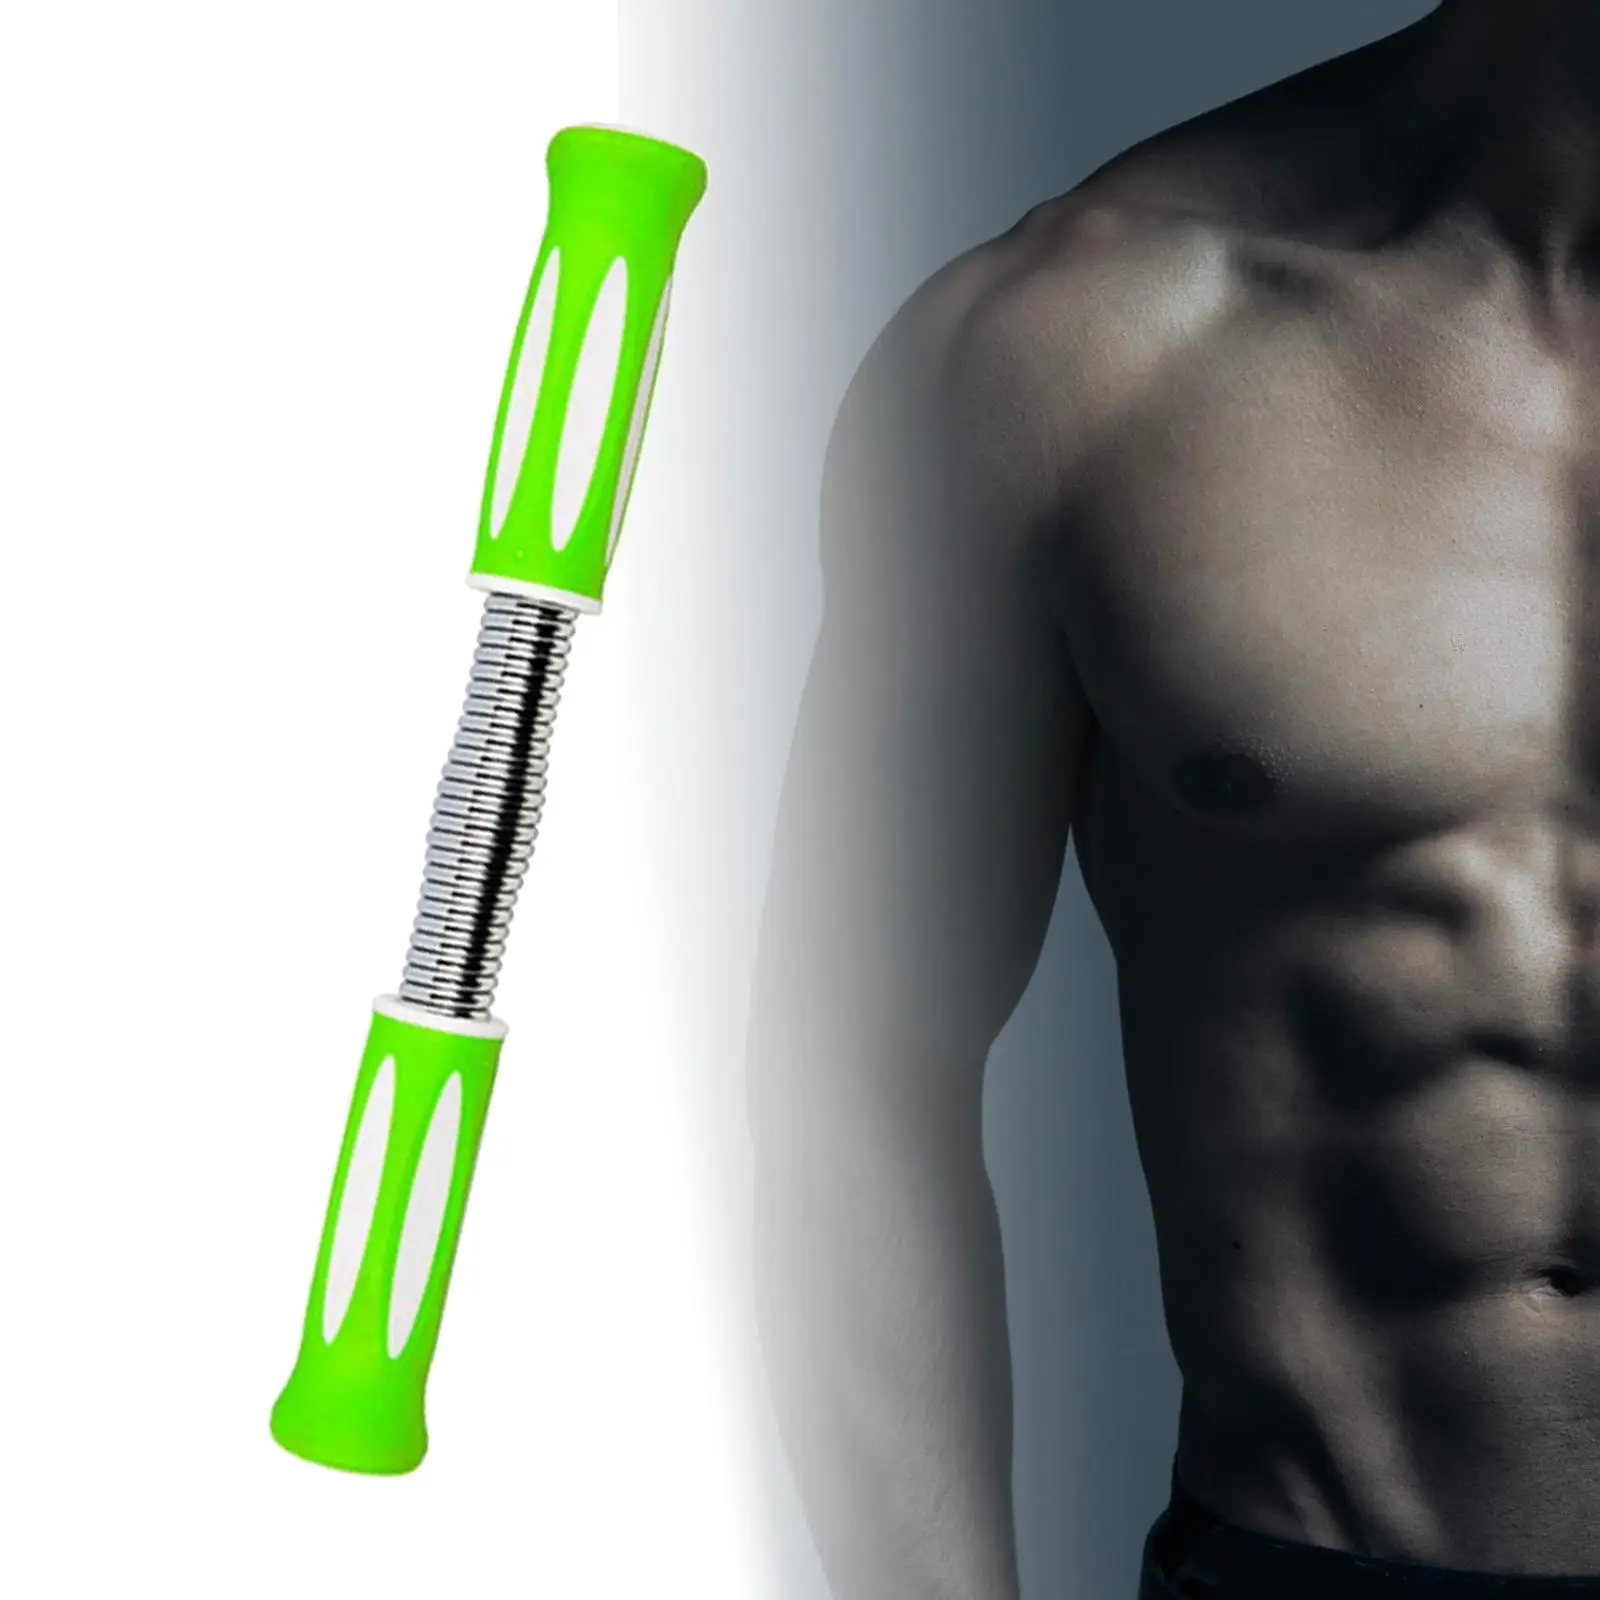 Power Twister Bar Chest Expander Workout Equipment Upper Body Exercise